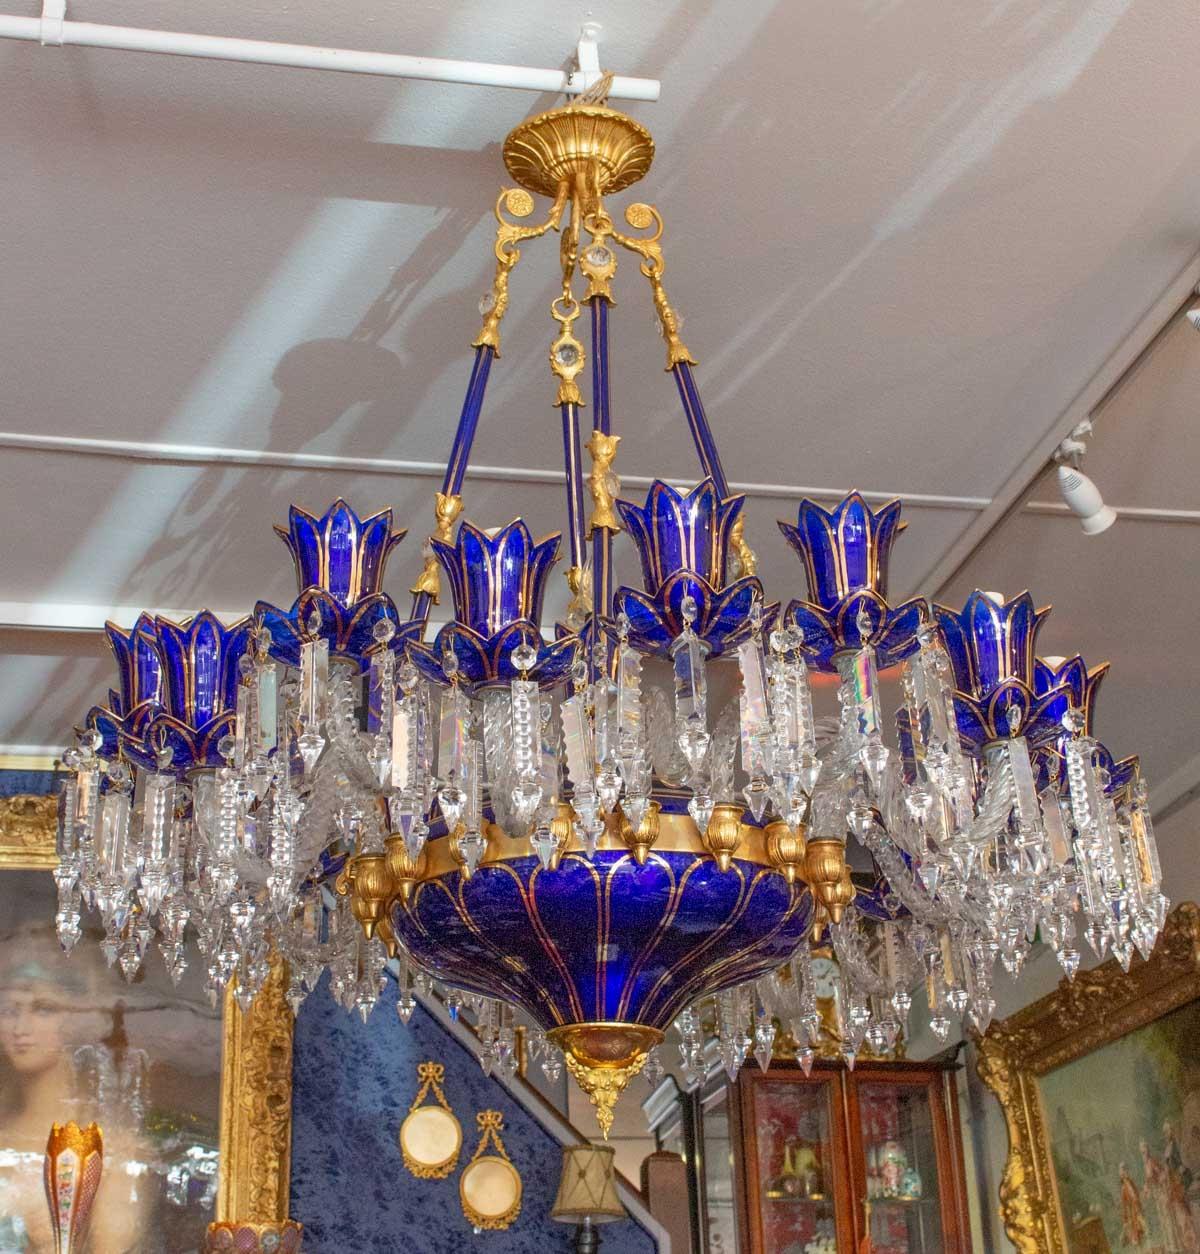 Pair of blue crystal and gilt bronze chandeliers with 18 light arms, in perfect condition, Italian work from the end of the 19th century, Napoleon III.
Measures: Diameter 90 cm
Height 100 cm.